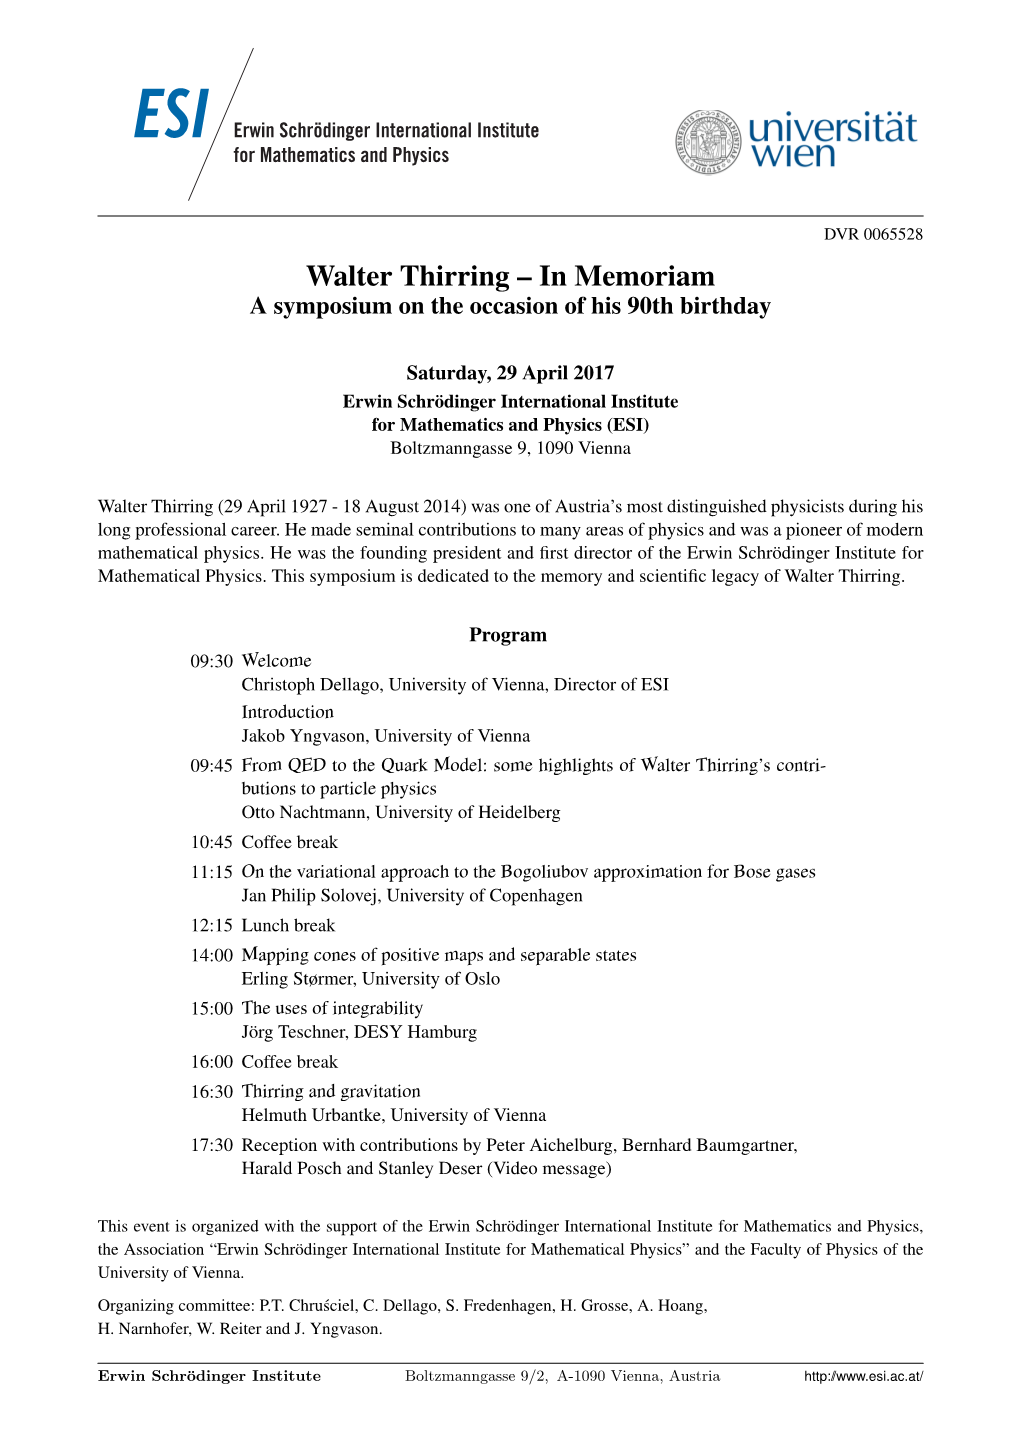 Walter Thirring – in Memoriam a Symposium on the Occasion of His 90Th Birthday